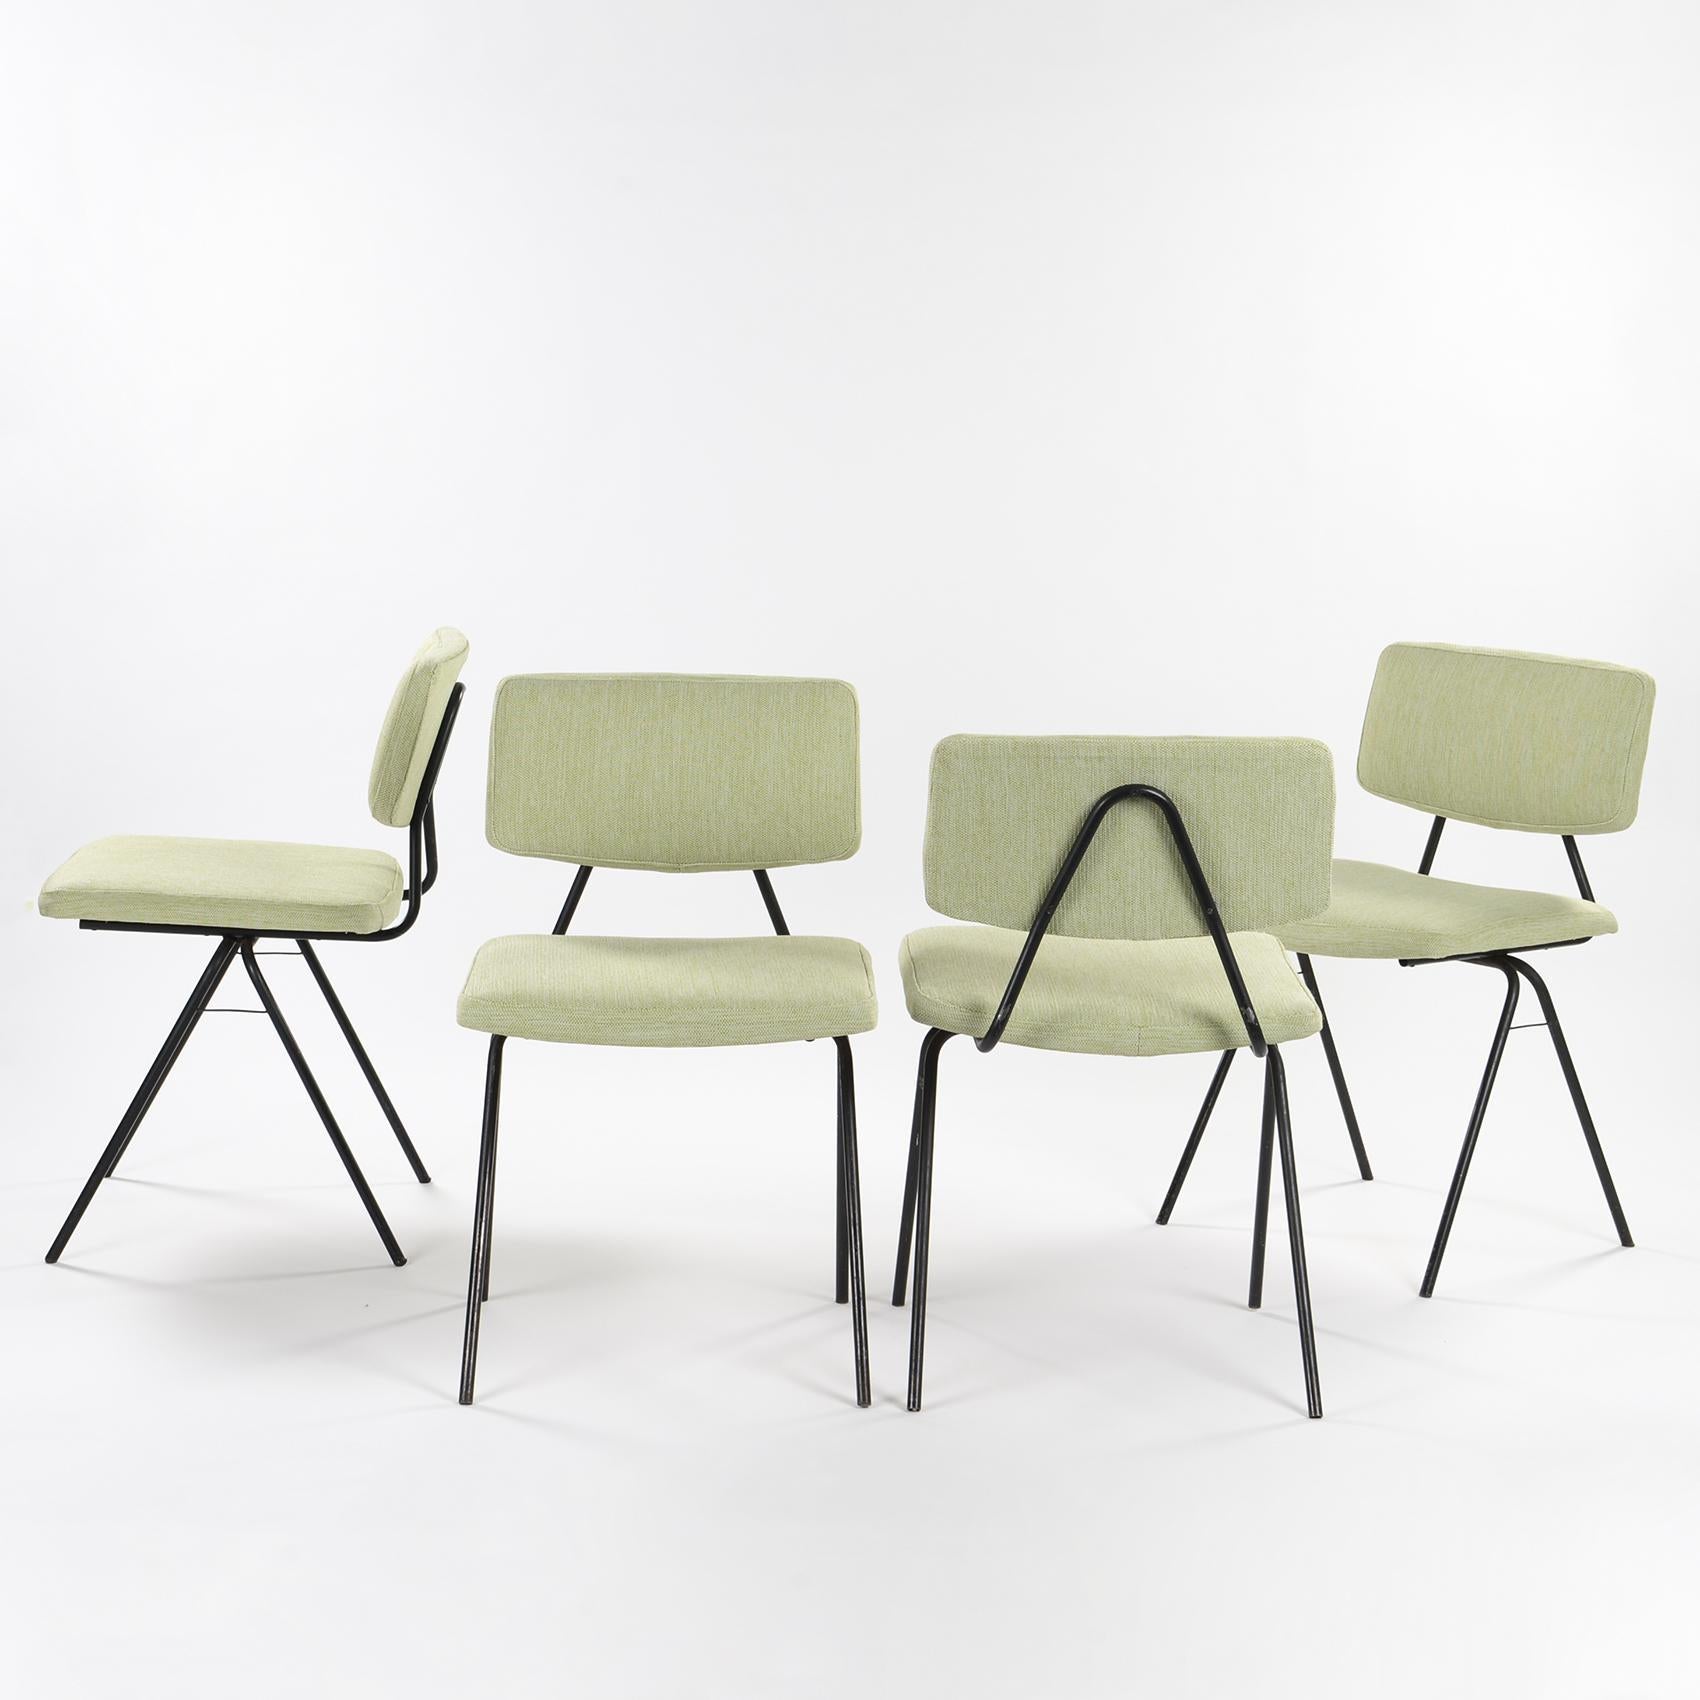 Set of four chairs designed by Pierre Guariche and published by Huchers Minvielle in the 50s.

The chairs are composed of a slightly compass base in black lacquered tubular metal with a restored foam seat and backrest, and covered with a slightly